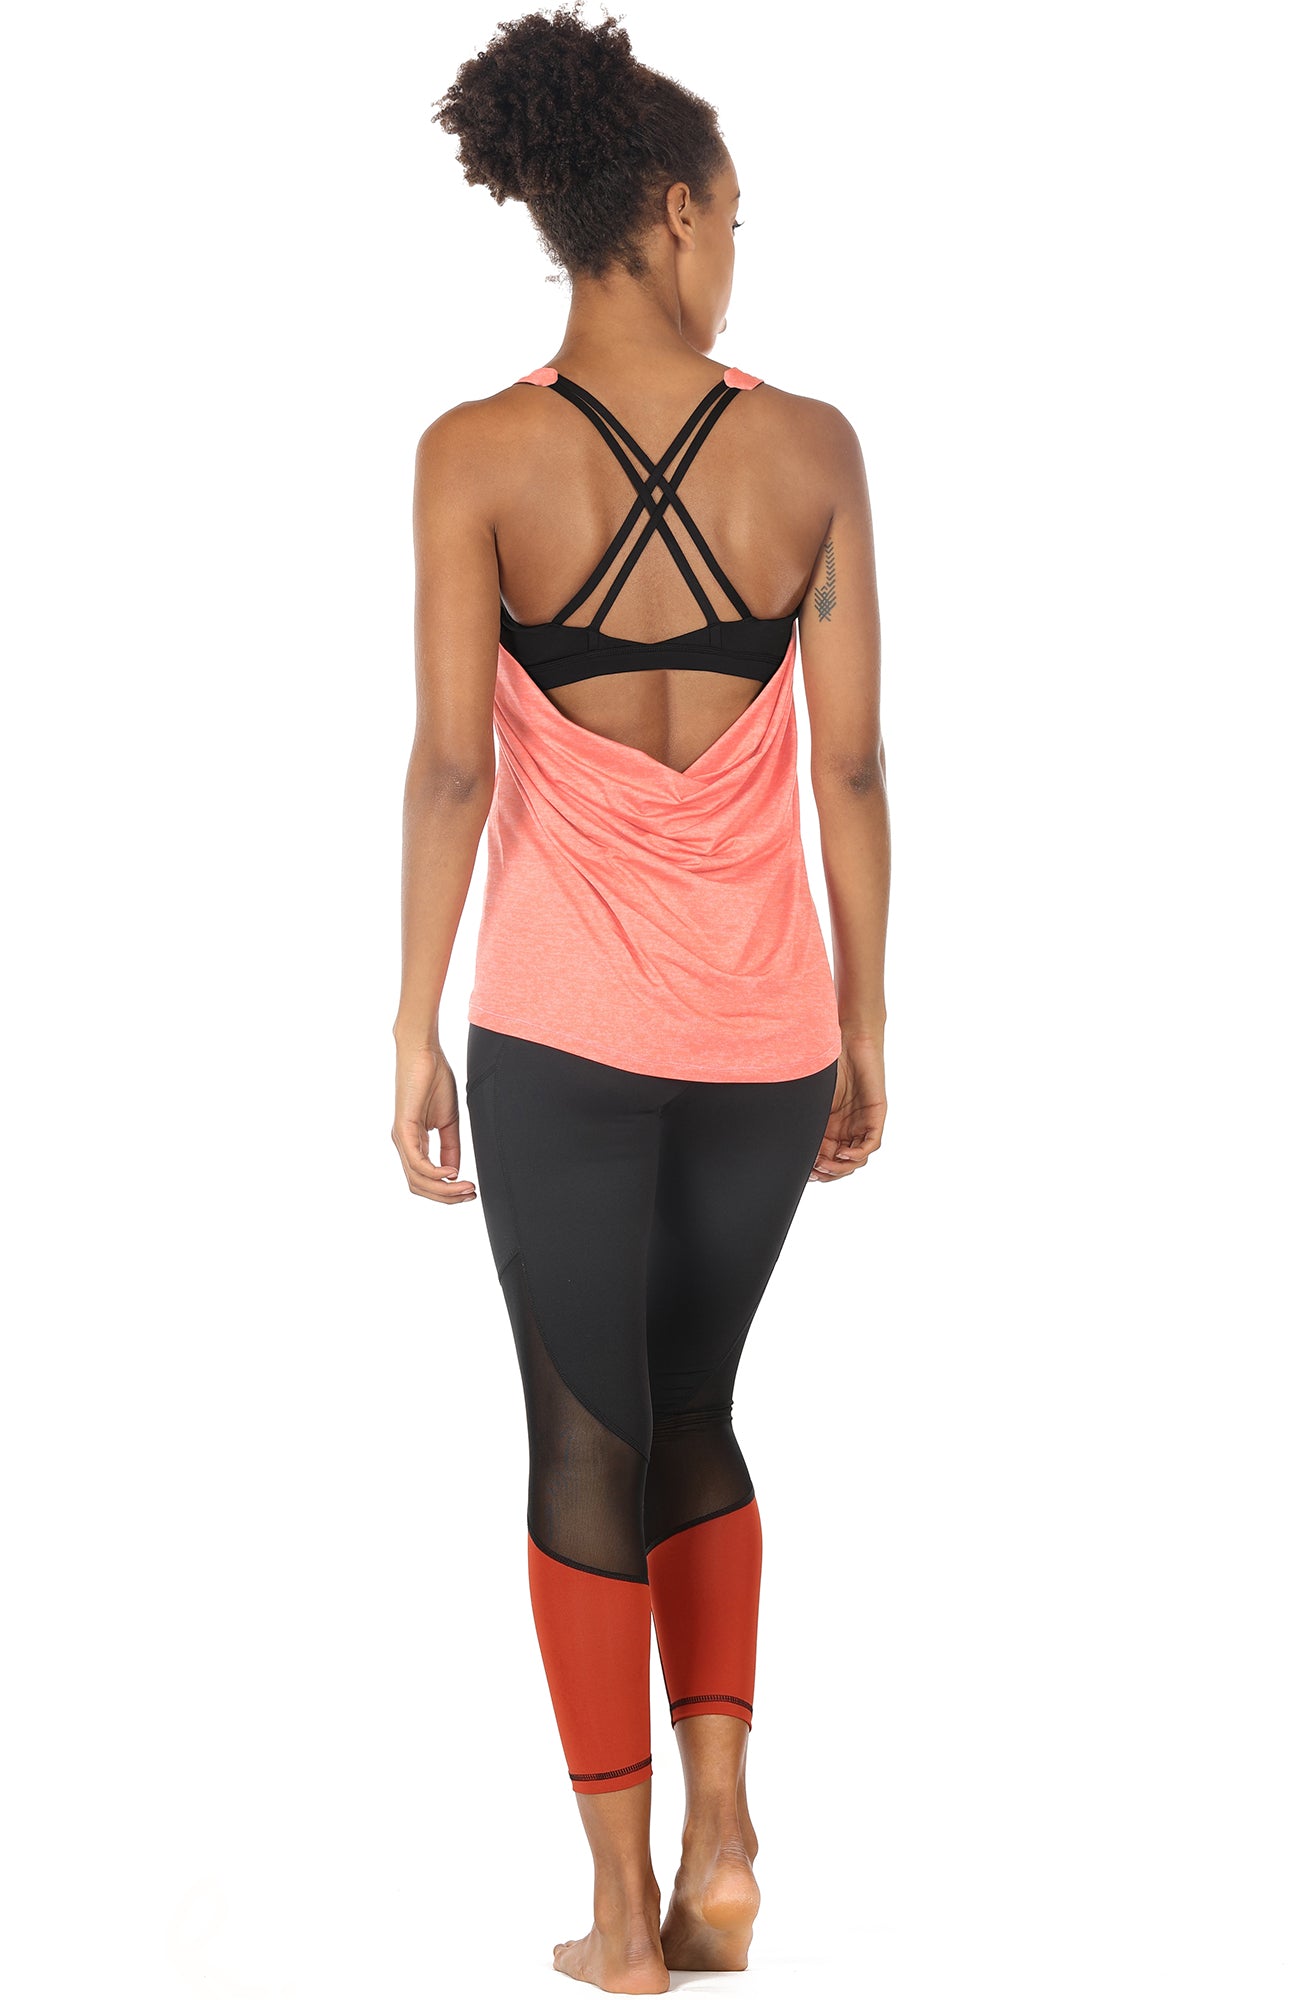 altiland Cropped Workout Tank Tops for Women with Built in Bra